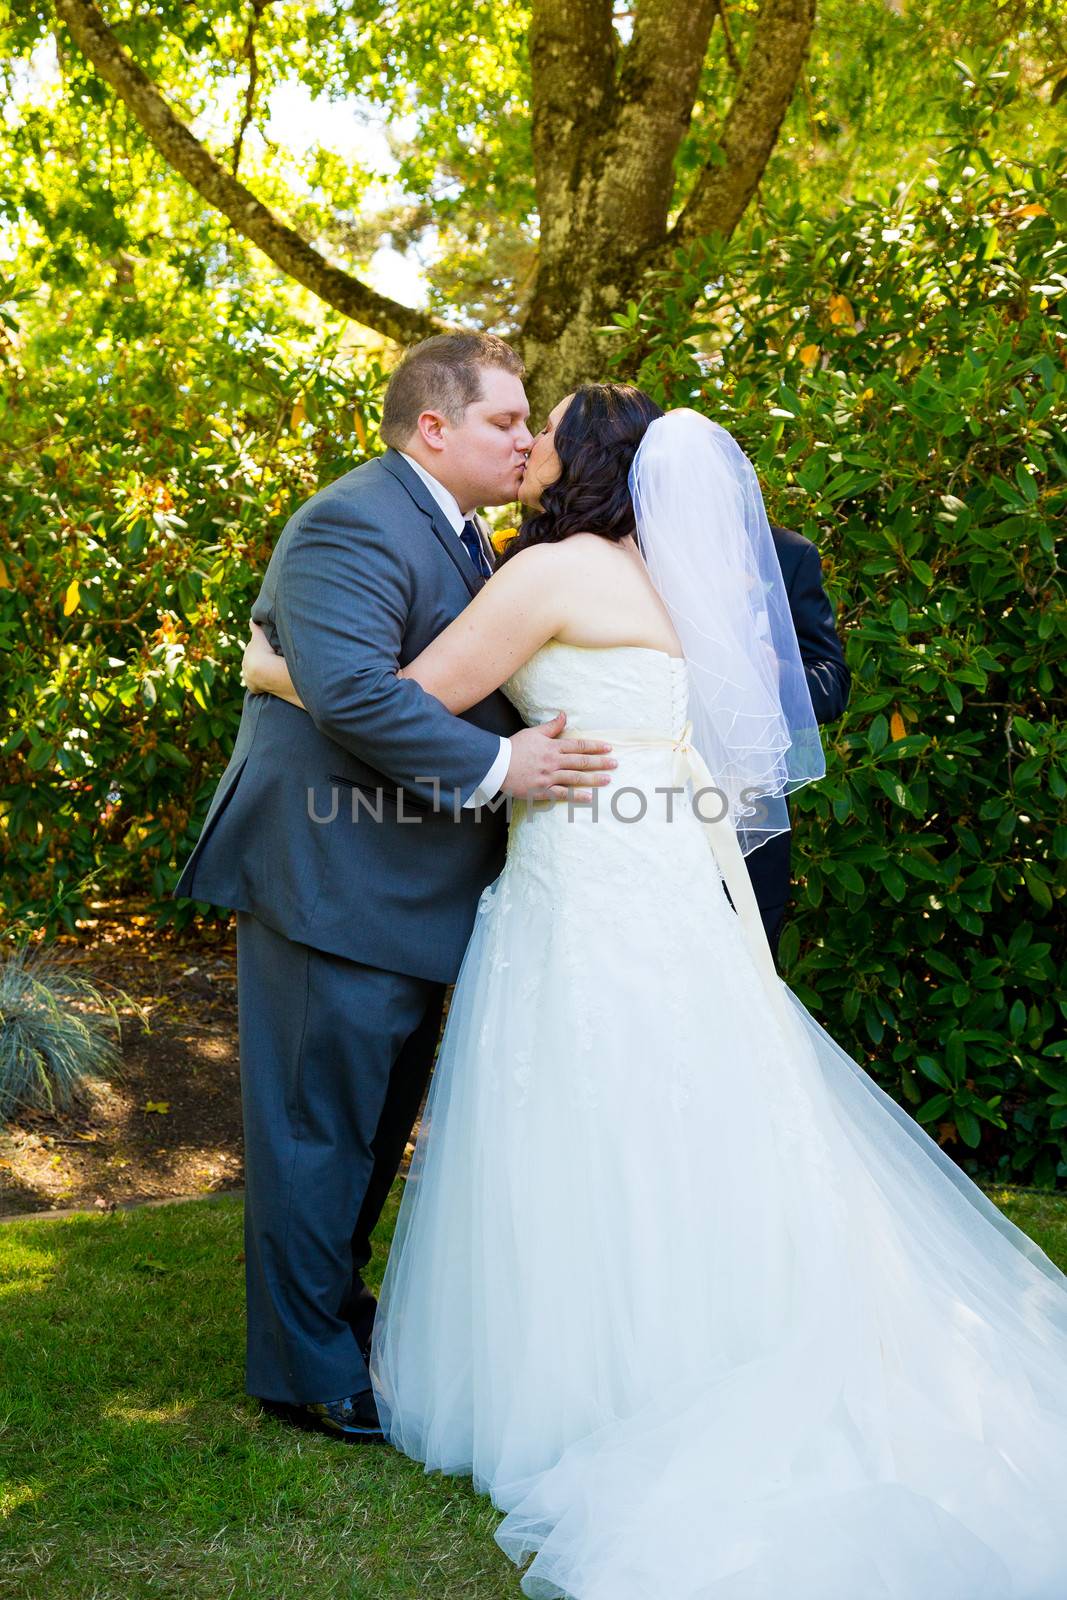 A bride and groom share their first kiss as a married couple and have a moment together during their marriage vows ceremony at an outdoor park in Oregon.